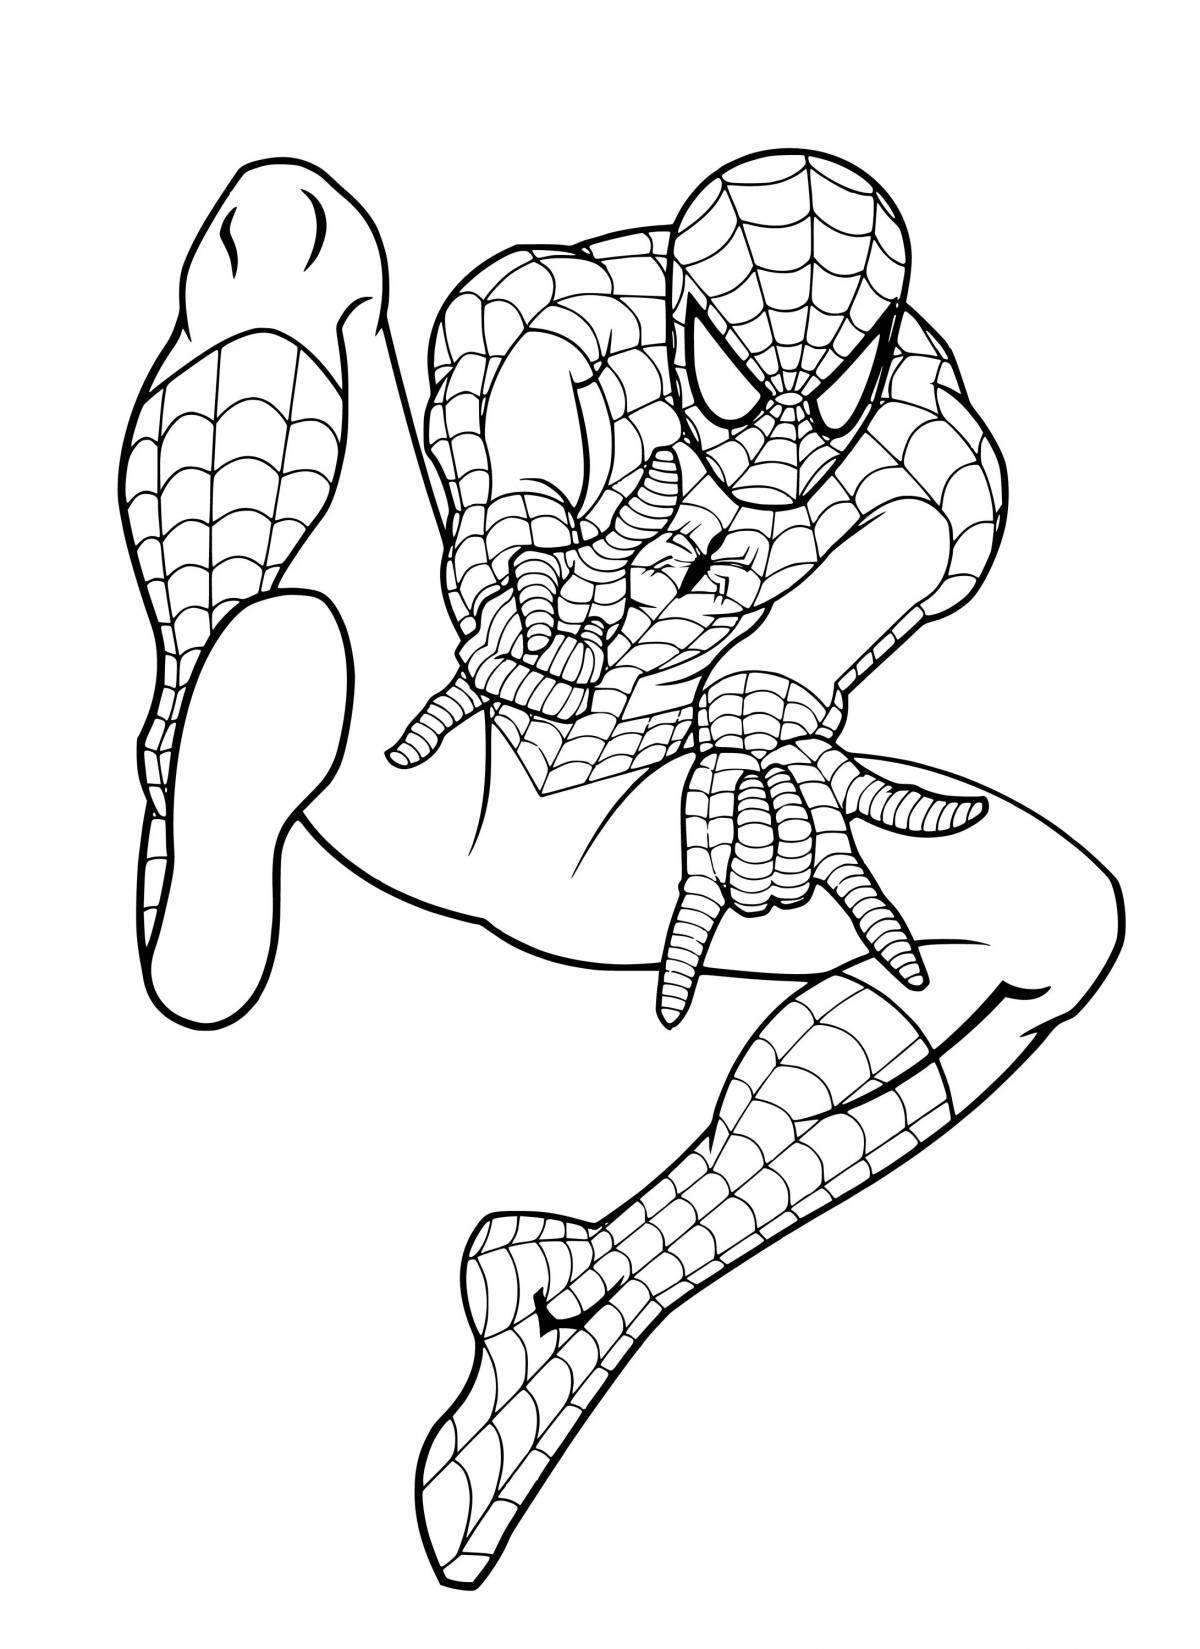 Spiderman creative coloring book for 6-7 year olds